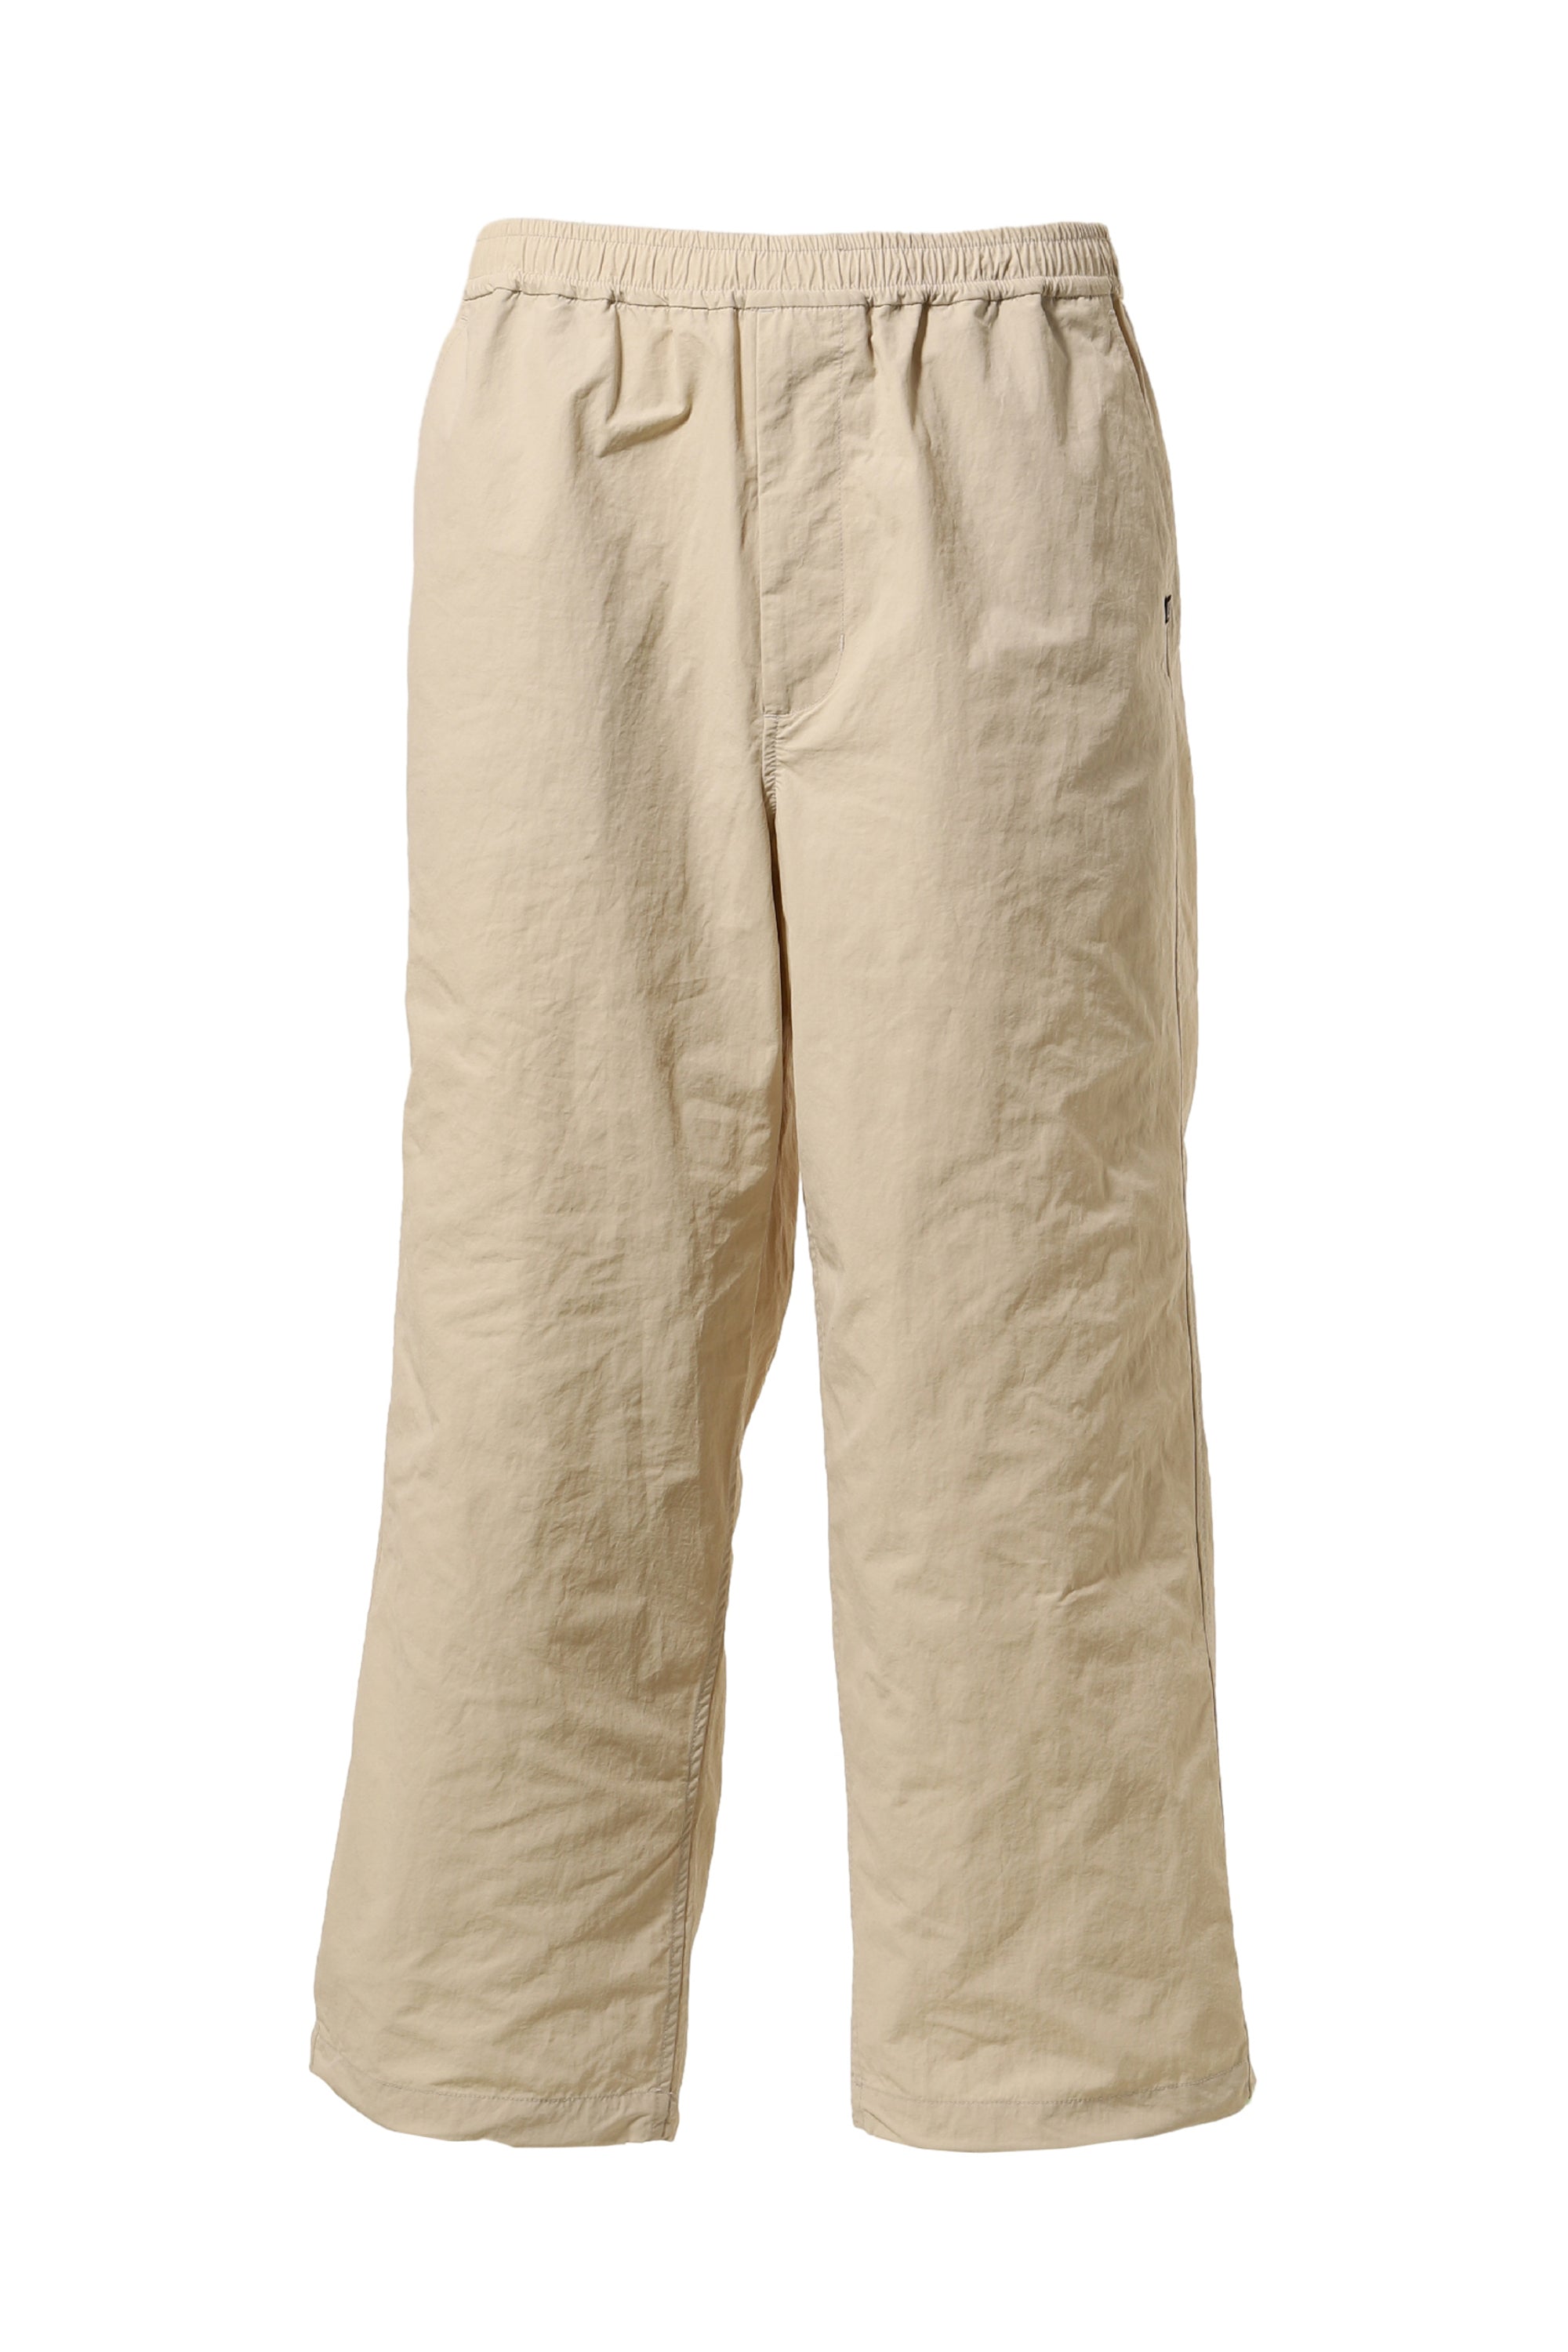 RCC Classic Twill Pants - Brown - Red Clouds Collective - Made in the USA